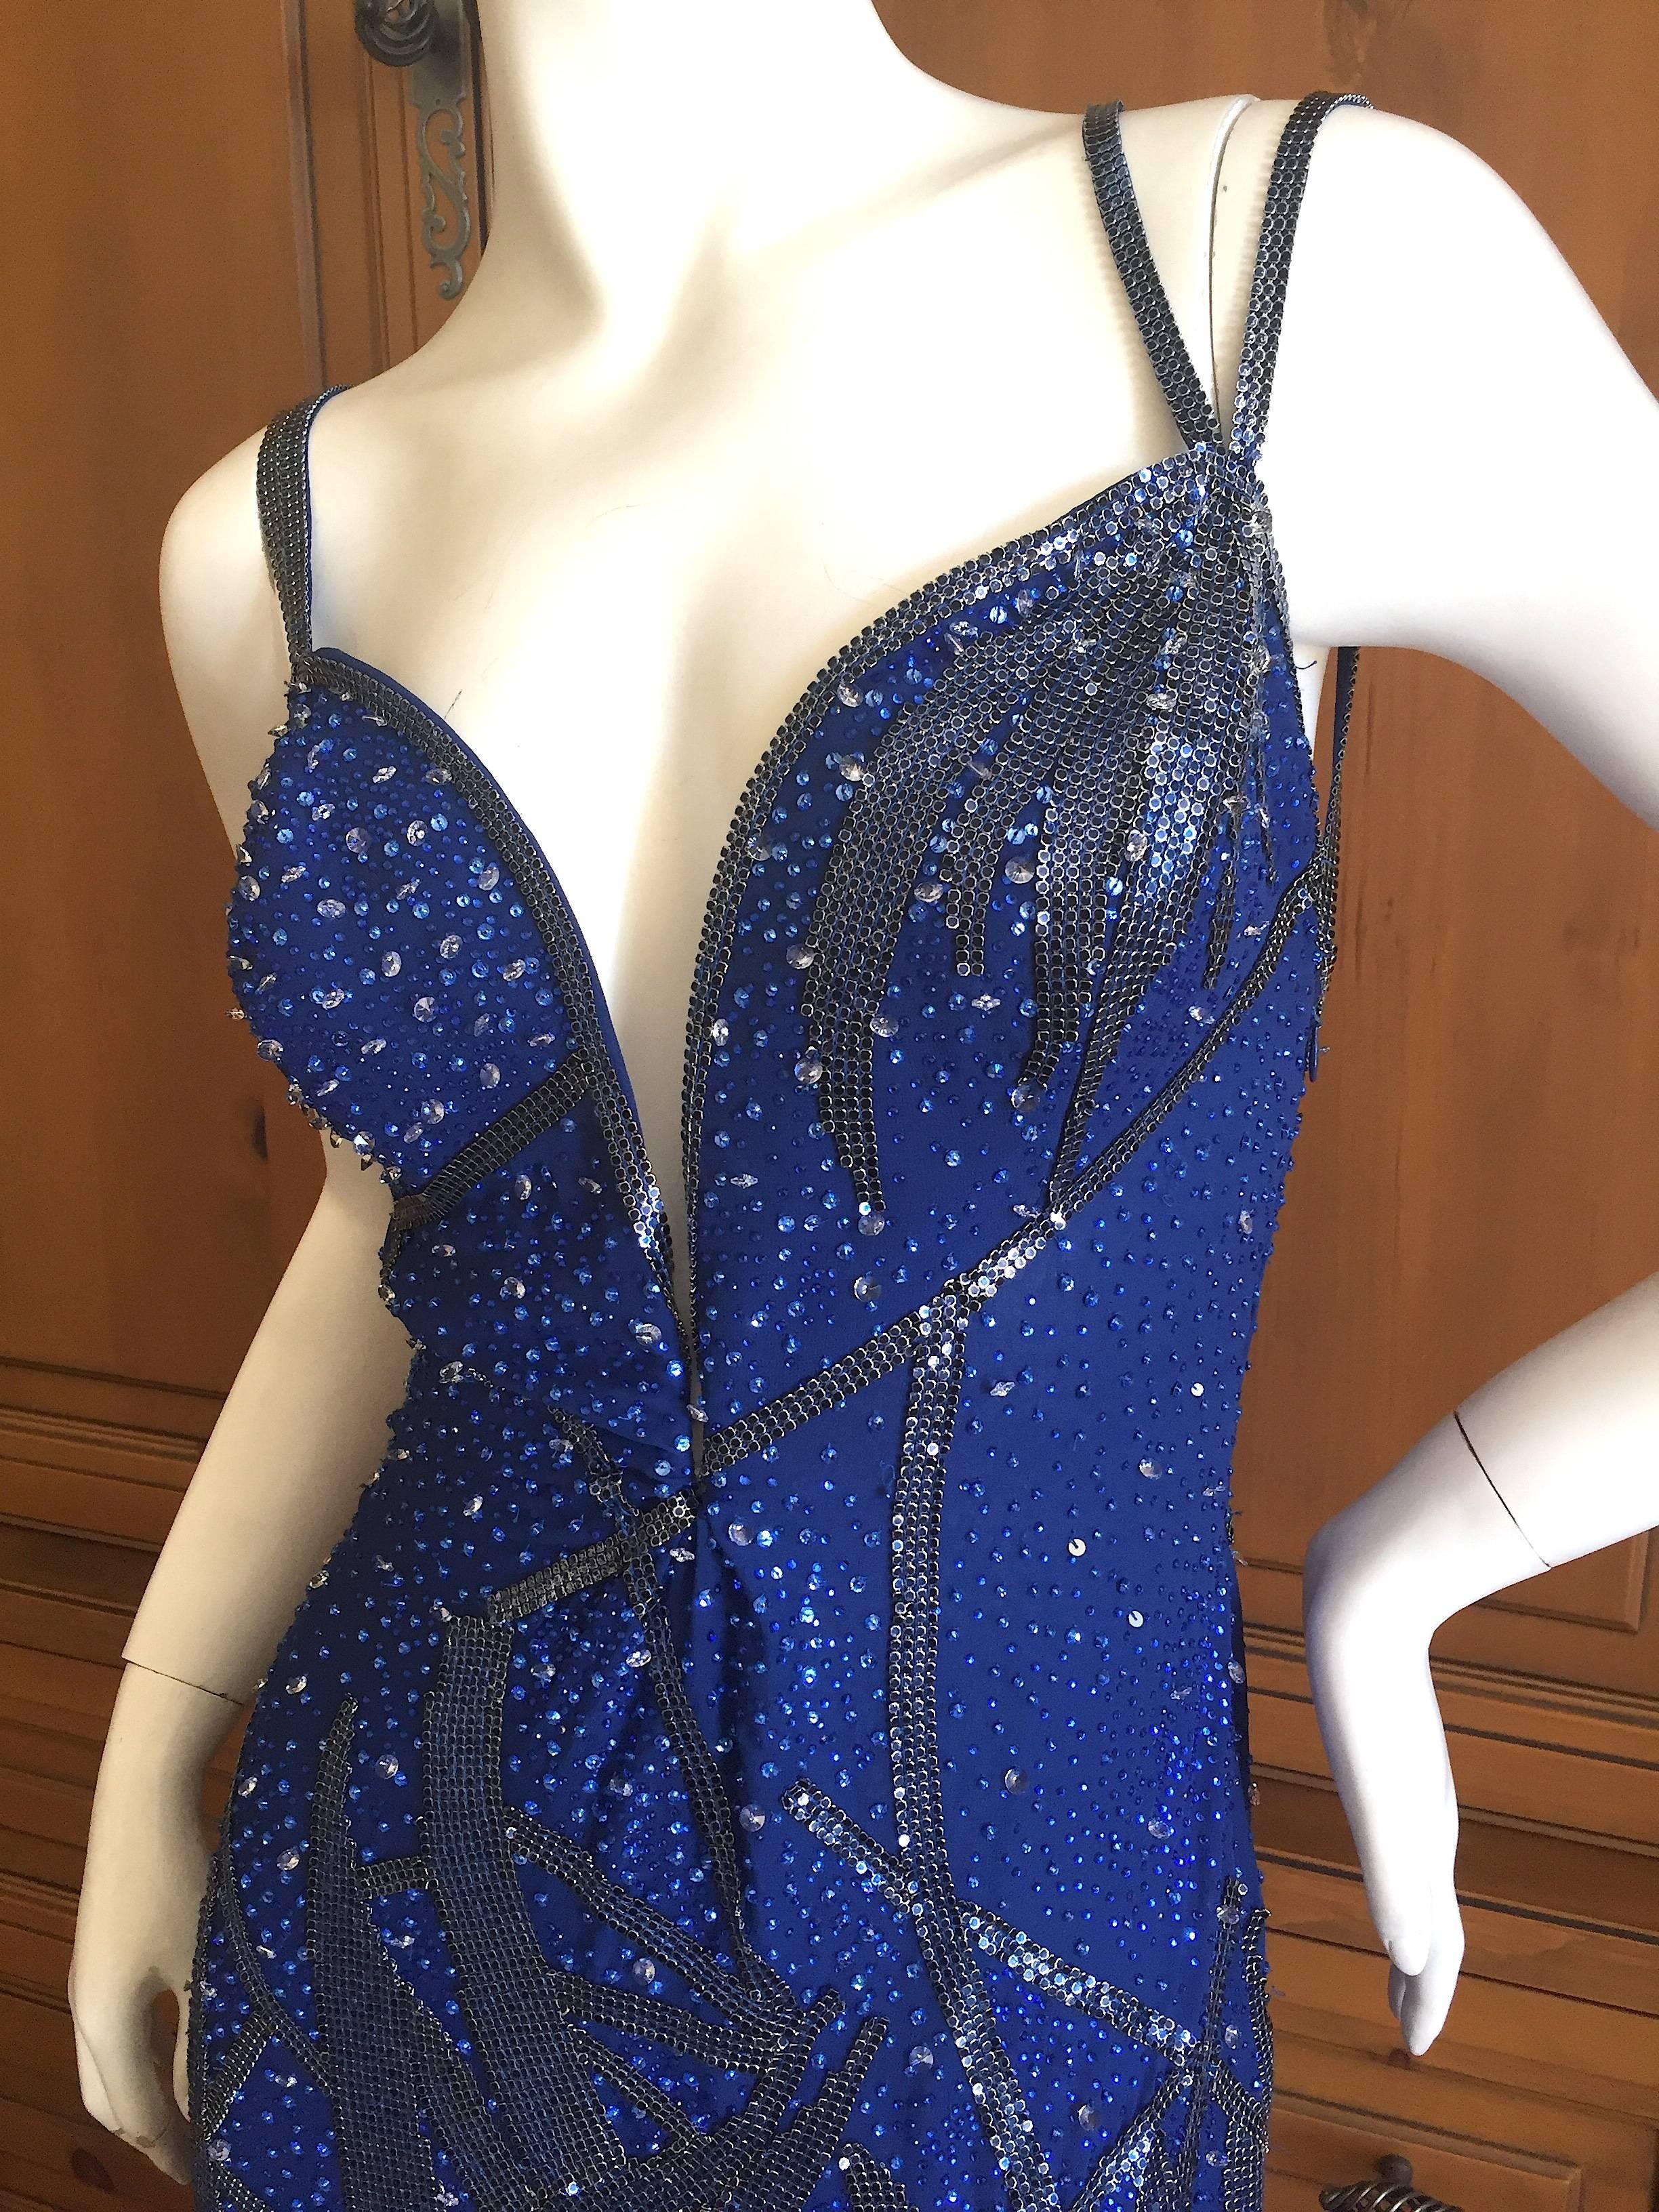 Atelier Versace Gianni Era Blue Evening Dress with Metal Mesh and Crystal Detail In Excellent Condition For Sale In Cloverdale, CA